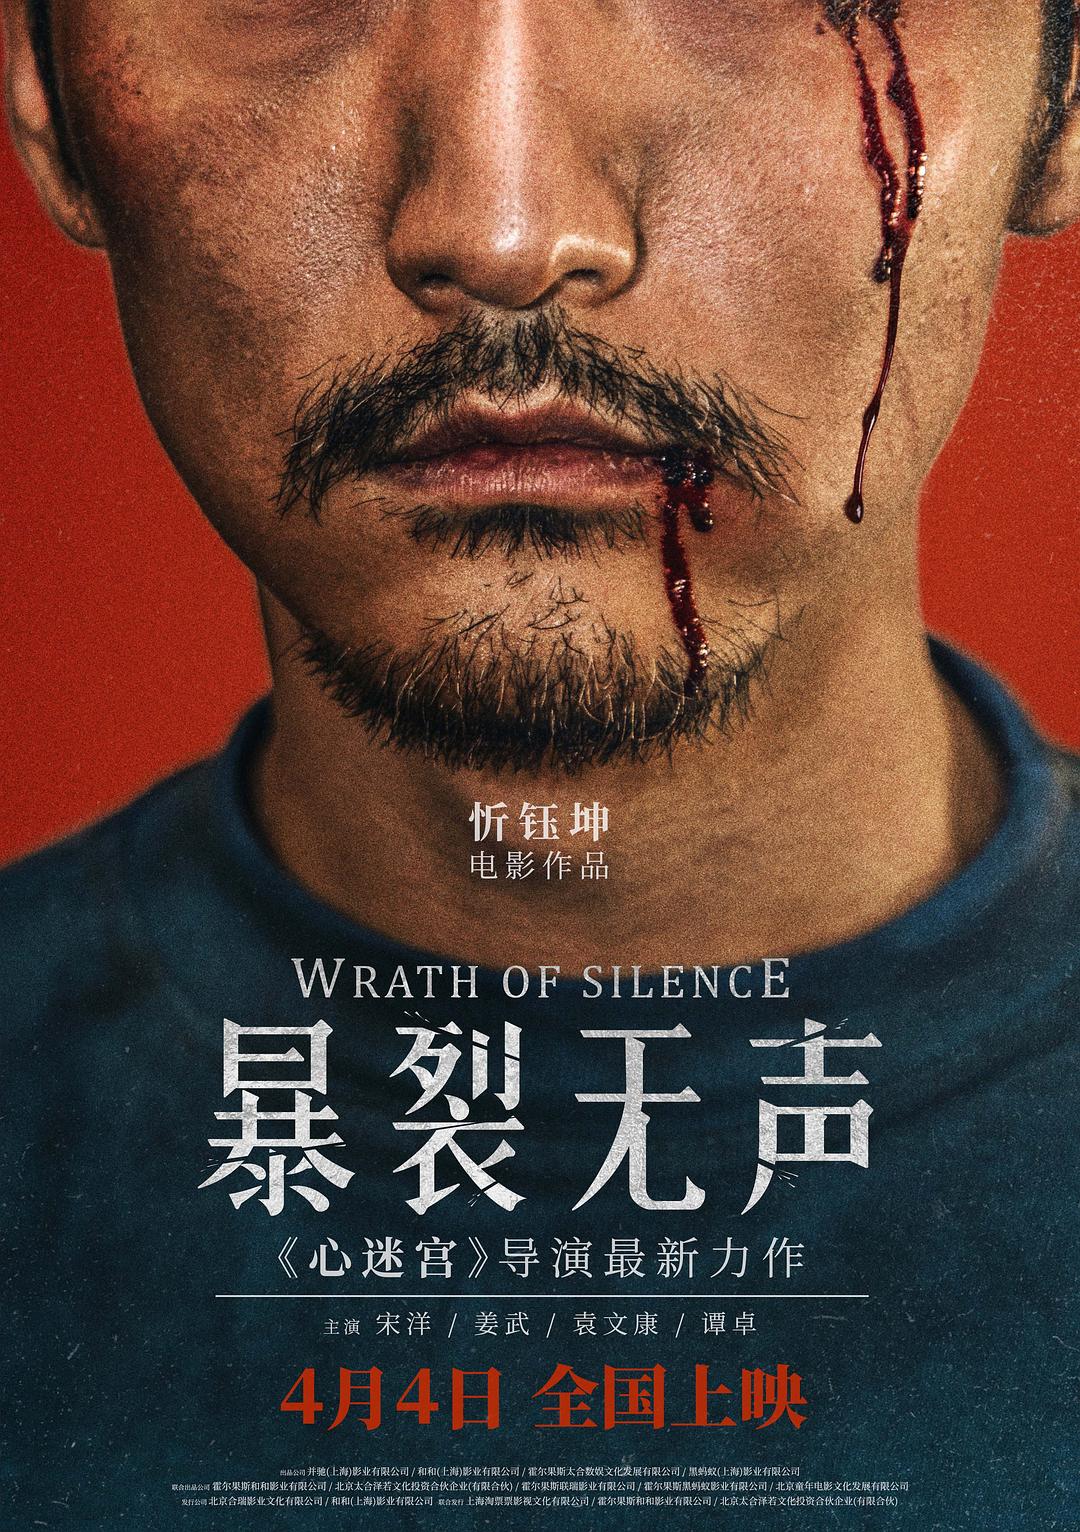  Wrath.Of.Silence.2017.CHINESE.1080p.BluRay.x264.DTS-WiKi 13.69GB-1.png